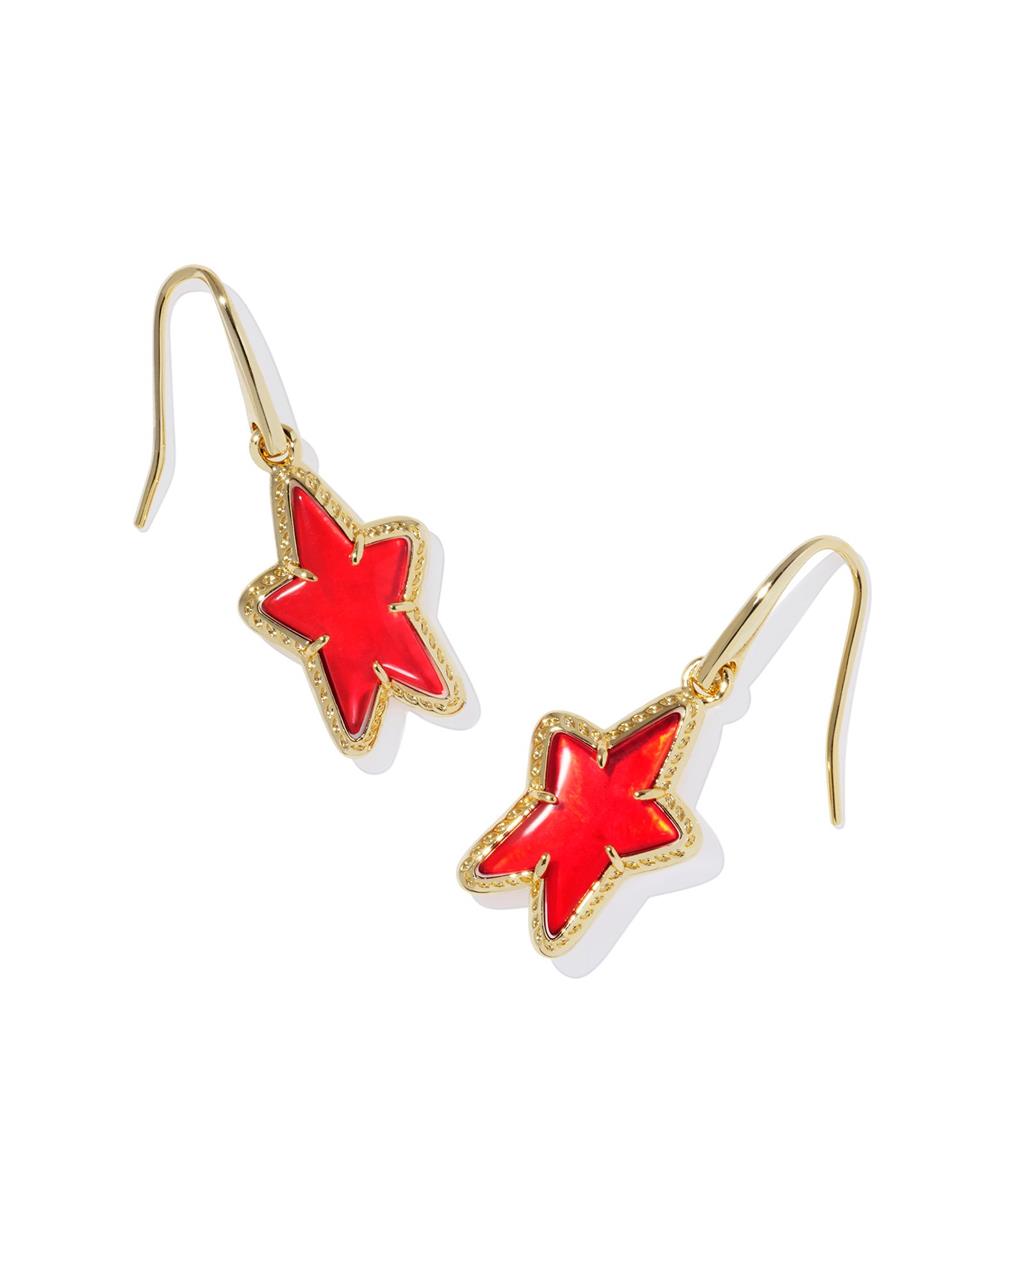 ADA STAR SMALL DROP EARRINGS GOLD RED ILLUSION